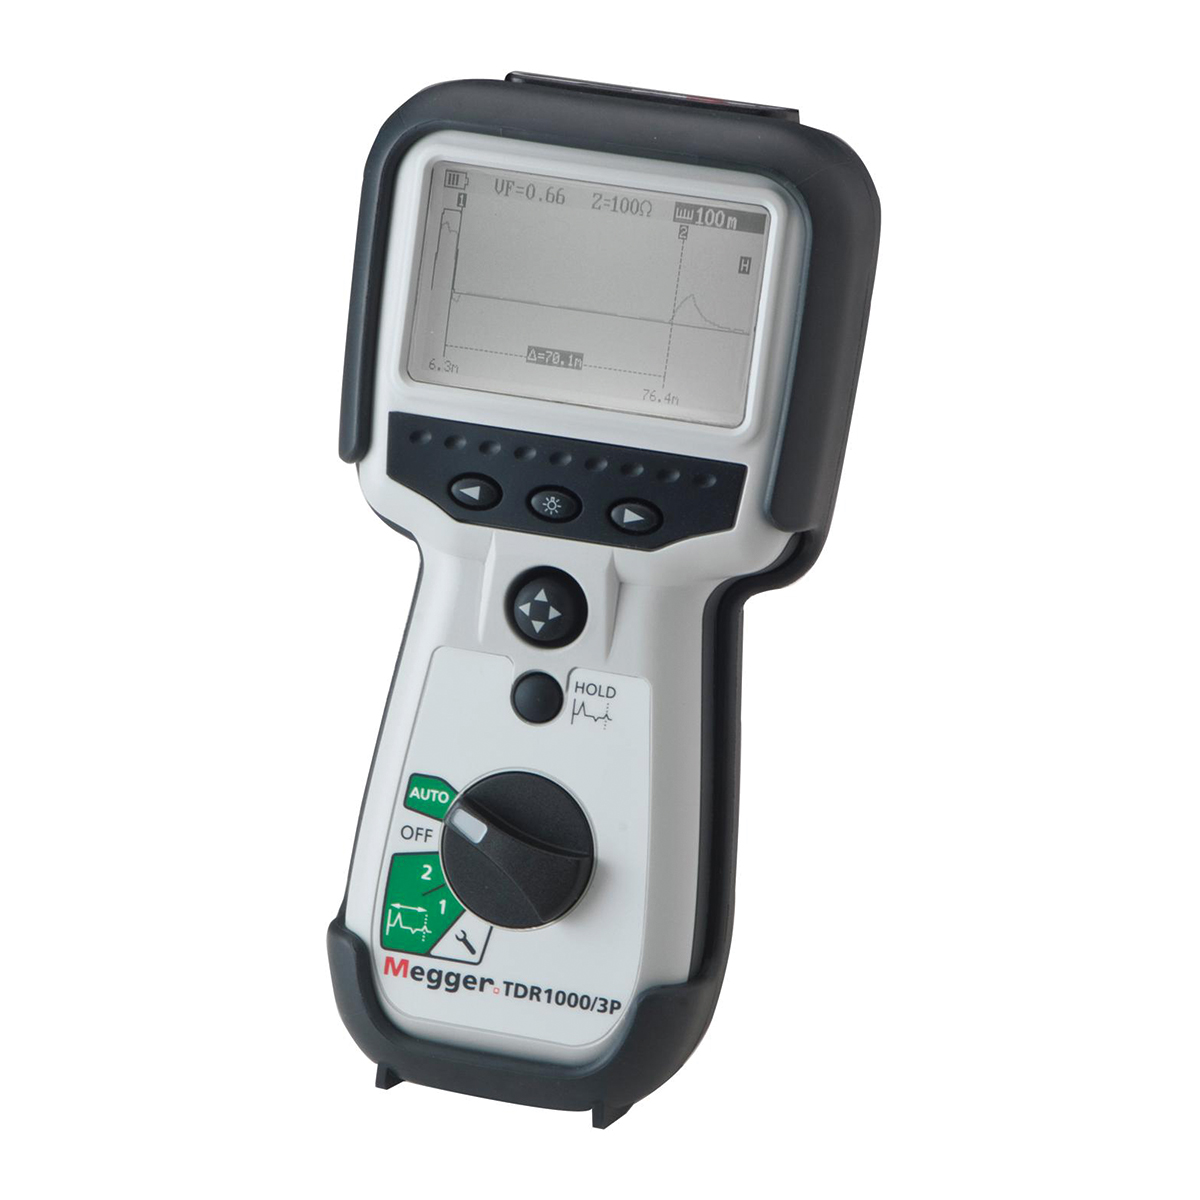 MEGGER 1001-789 TDR1000/3P Power - Handheld Time Domain Reflectometer (Cable Fault Locator)